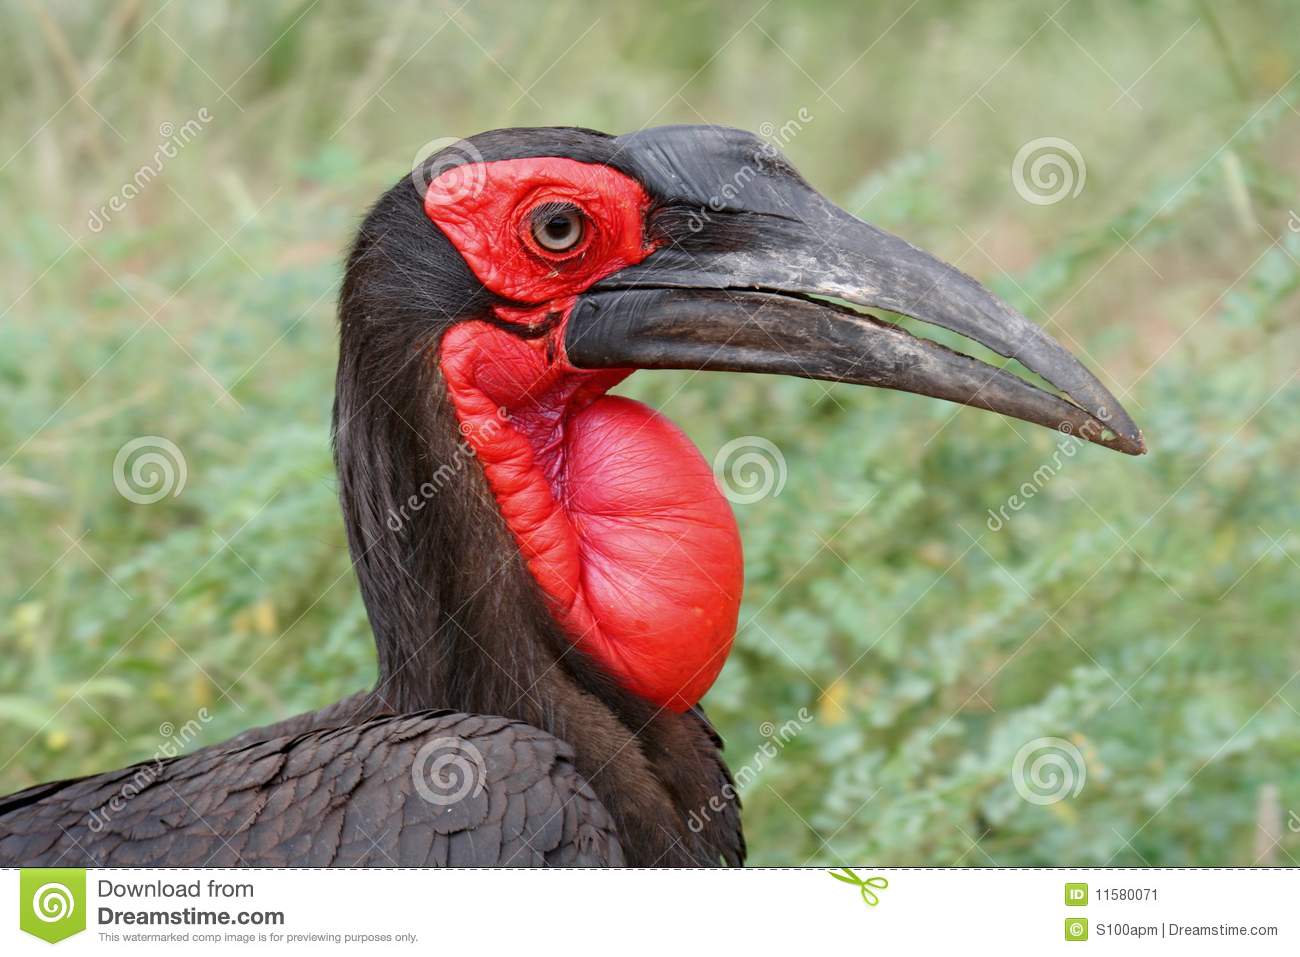 Southern Ground Hornbill clipart #6, Download drawings